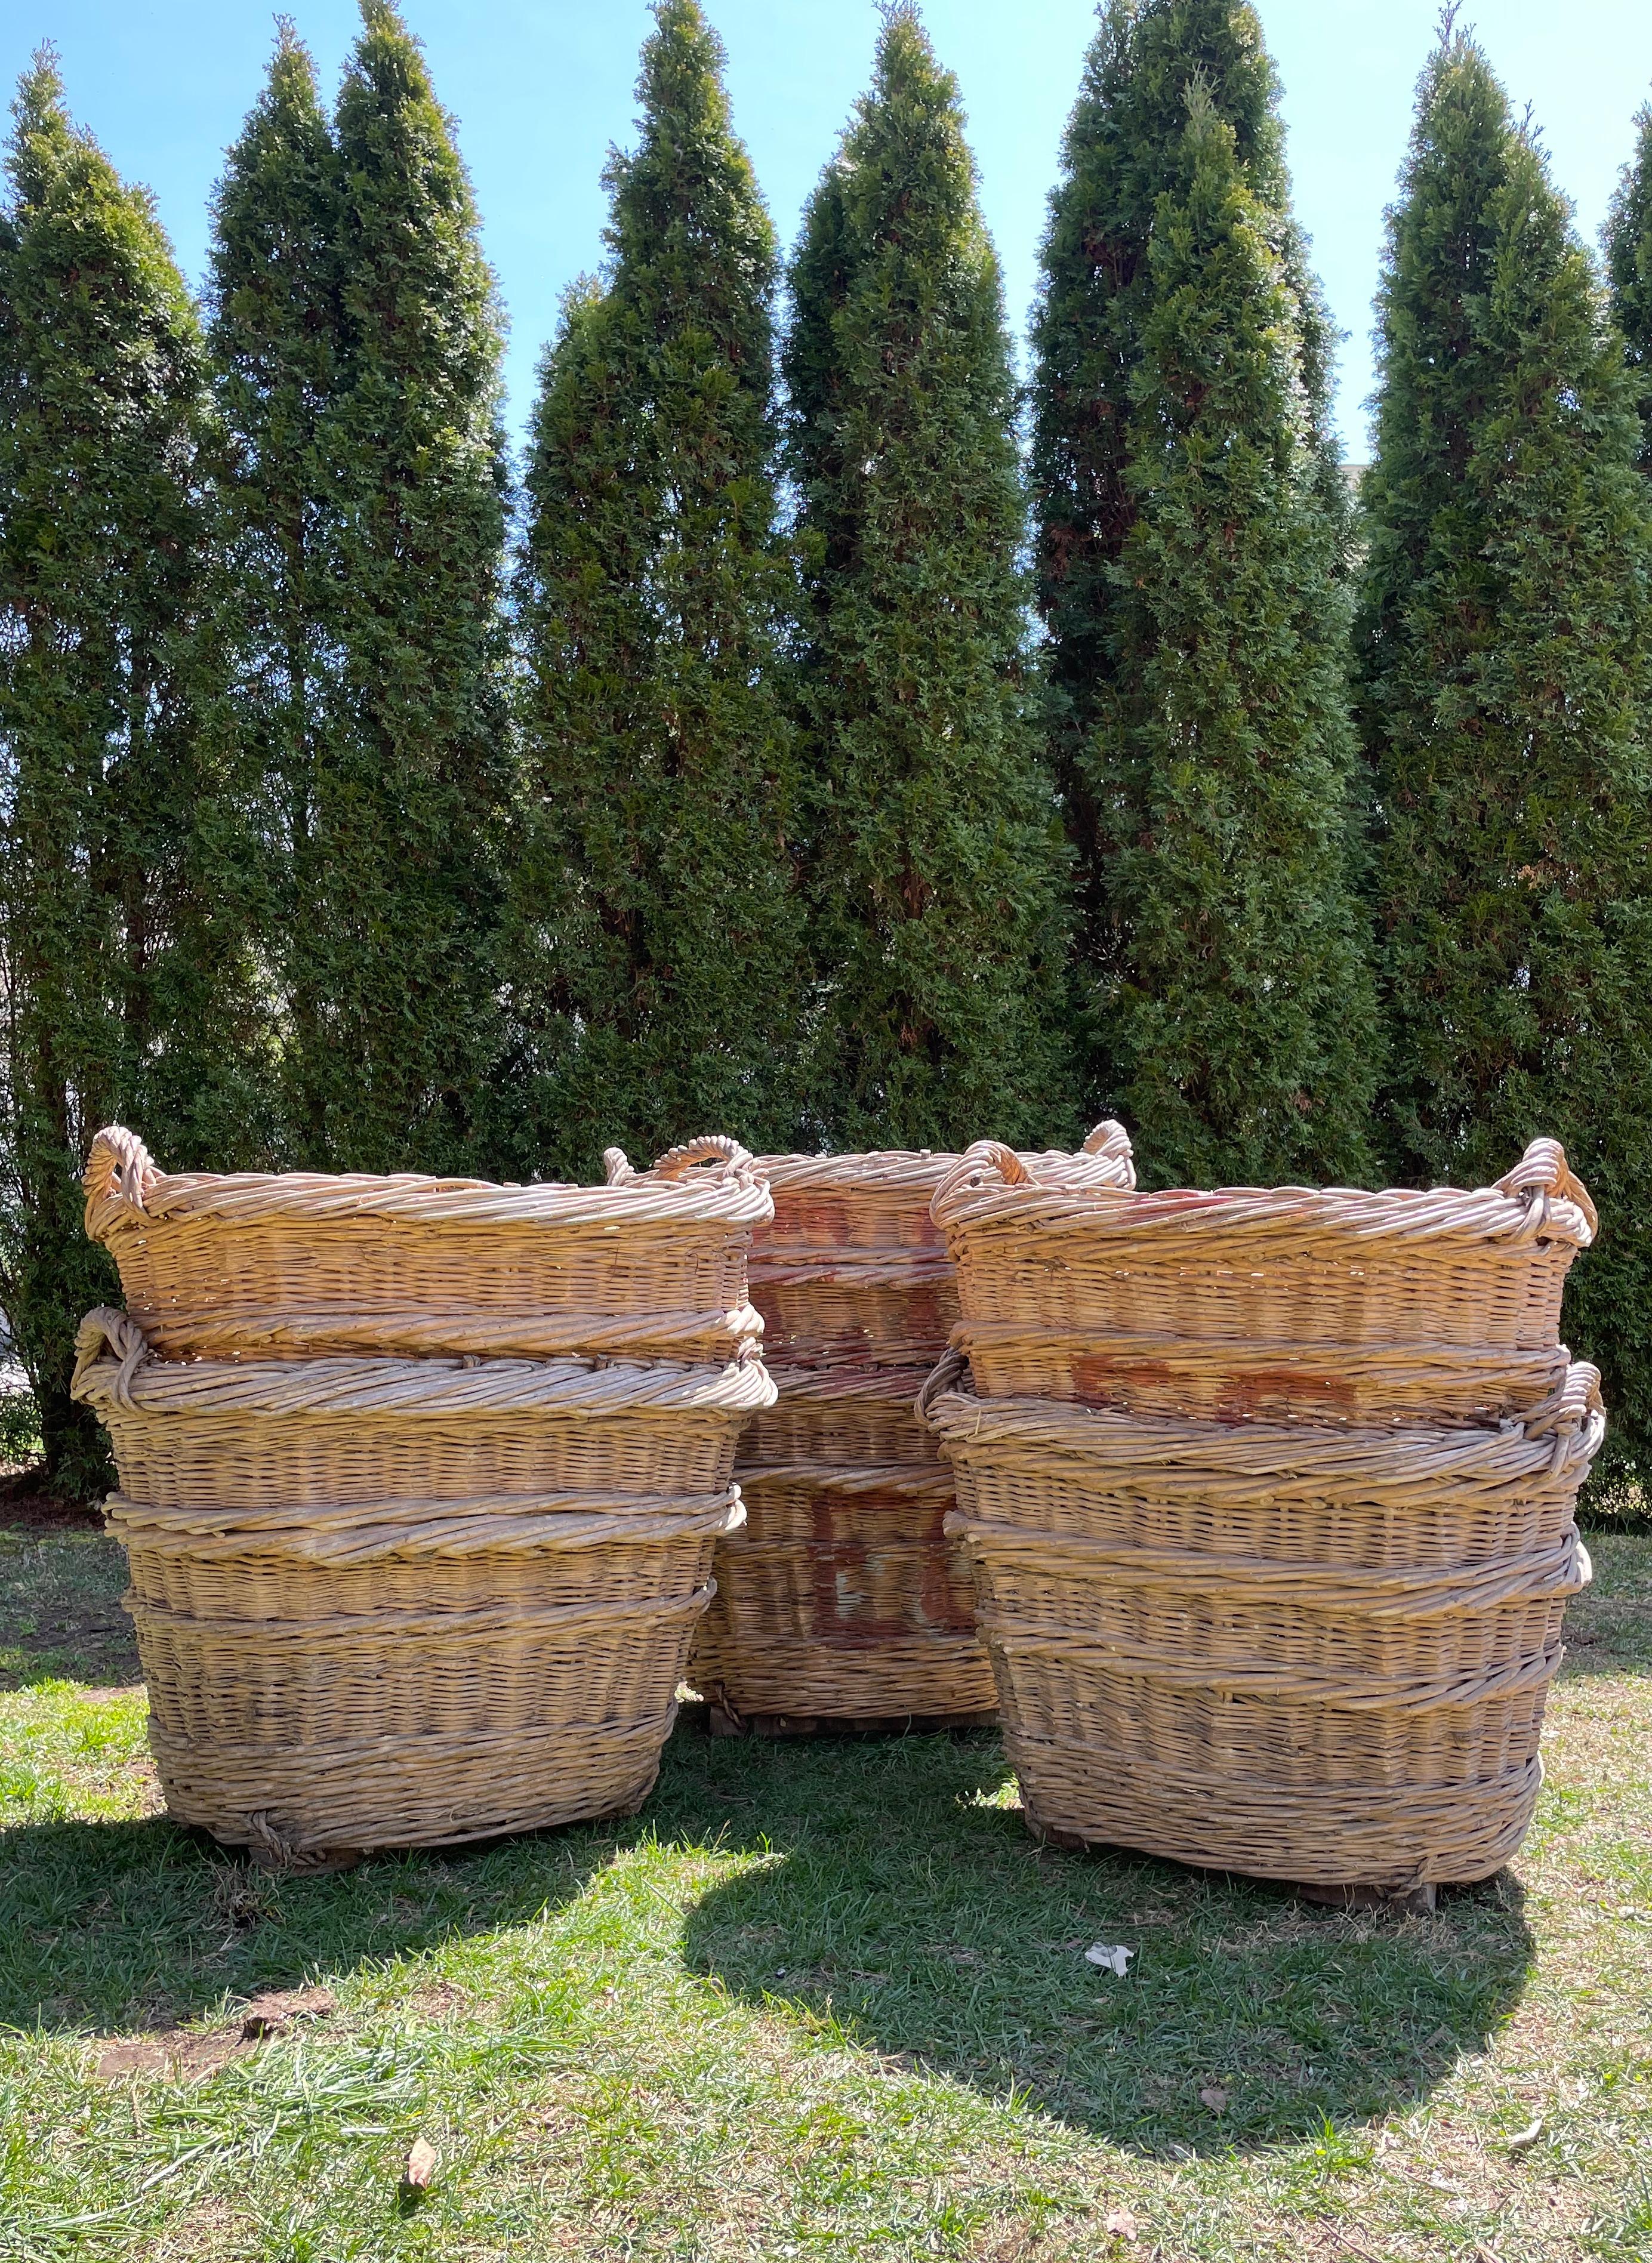 Beautiful champagne baskets such as these are increasingly difficult to find nowadays and these are special ones. Hand-woven from thick wicker reeds, they feature decorative horizontal braiding, sturdy handles, and original wooden skids on their